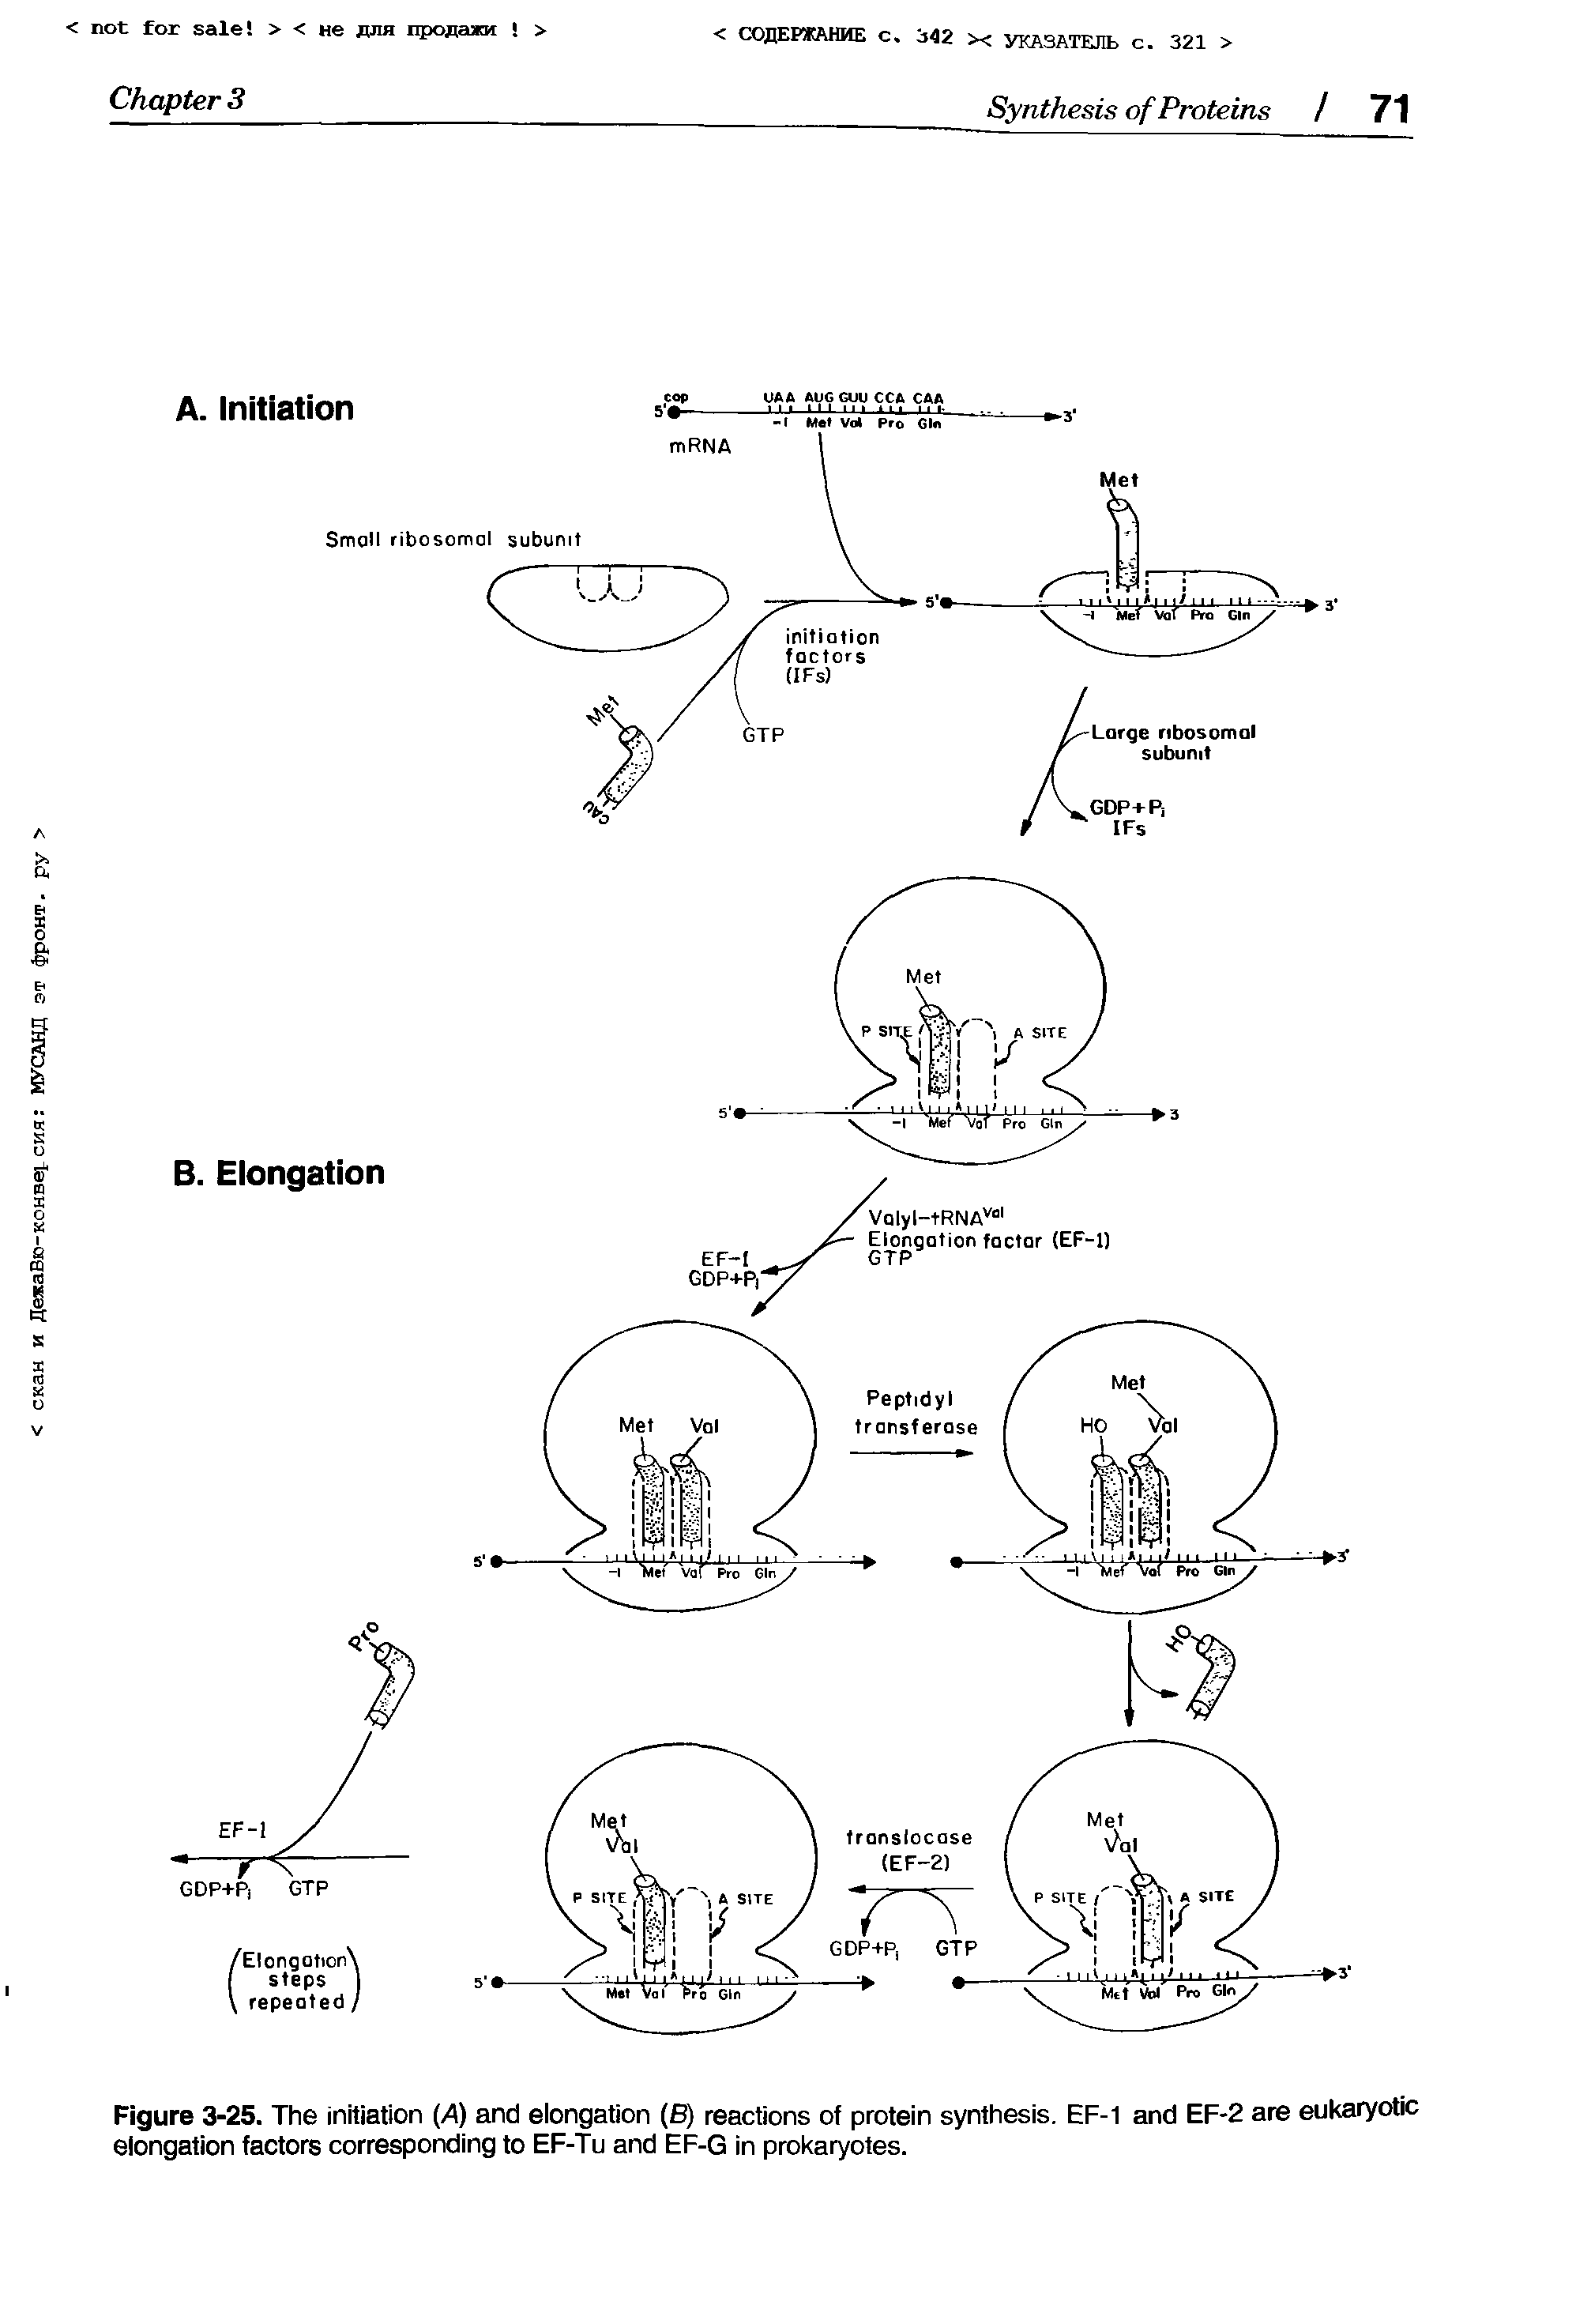 Figure 3-25. The initiation (A) and elongation (B) reactions of protein synthesis. EF-1 and EF-2 are eukaryotic elongation factors corresponding to EF-Tu and EF-G in prokaryotes.